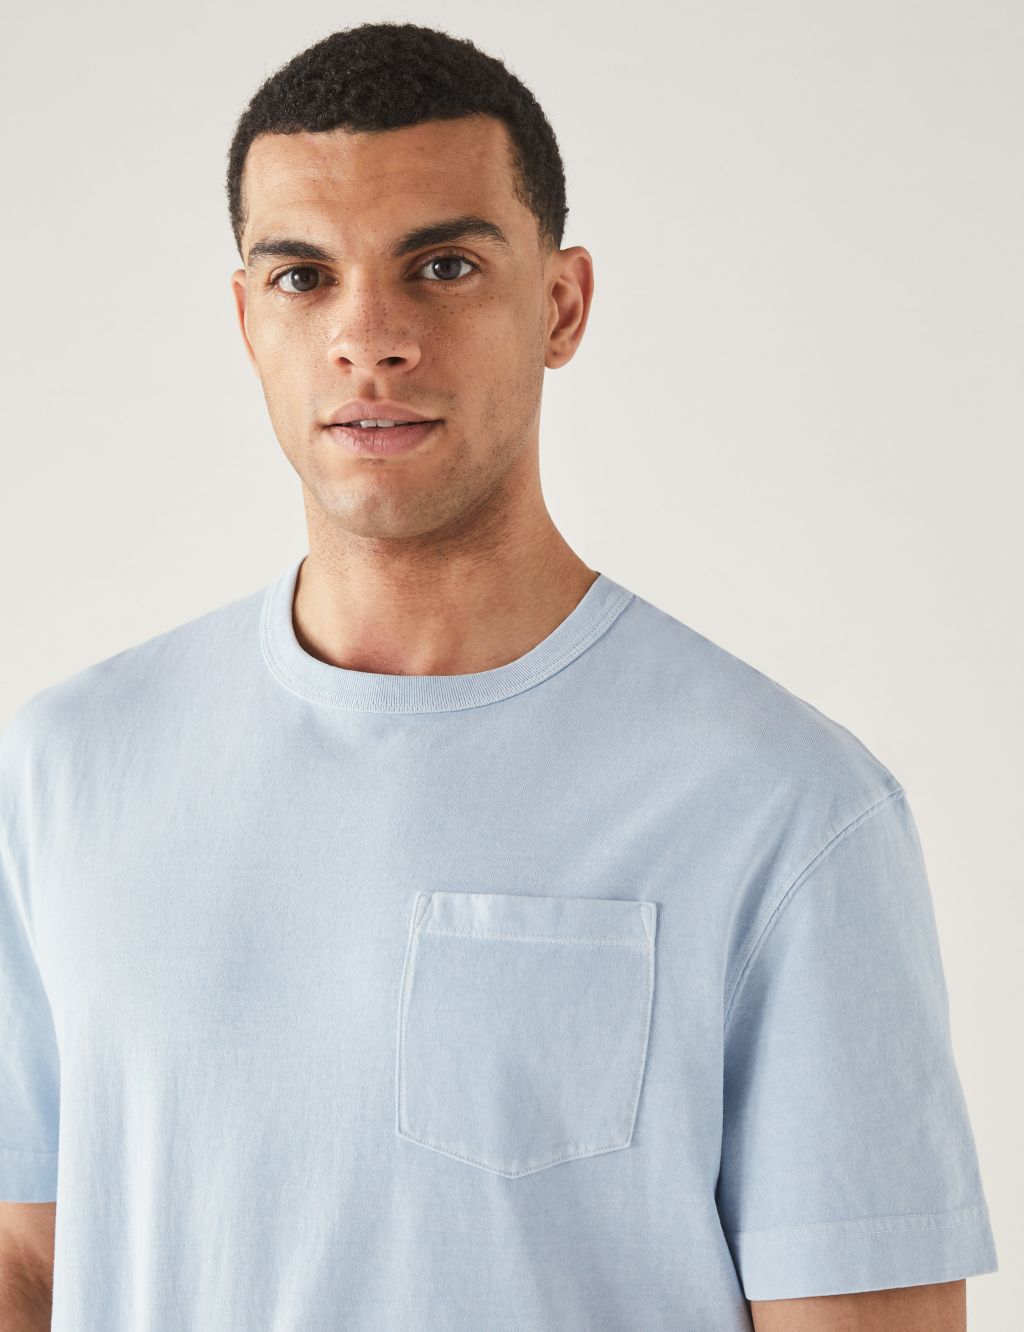 Relaxed Fit Pure Cotton Crew Neck T-Shirt image 3